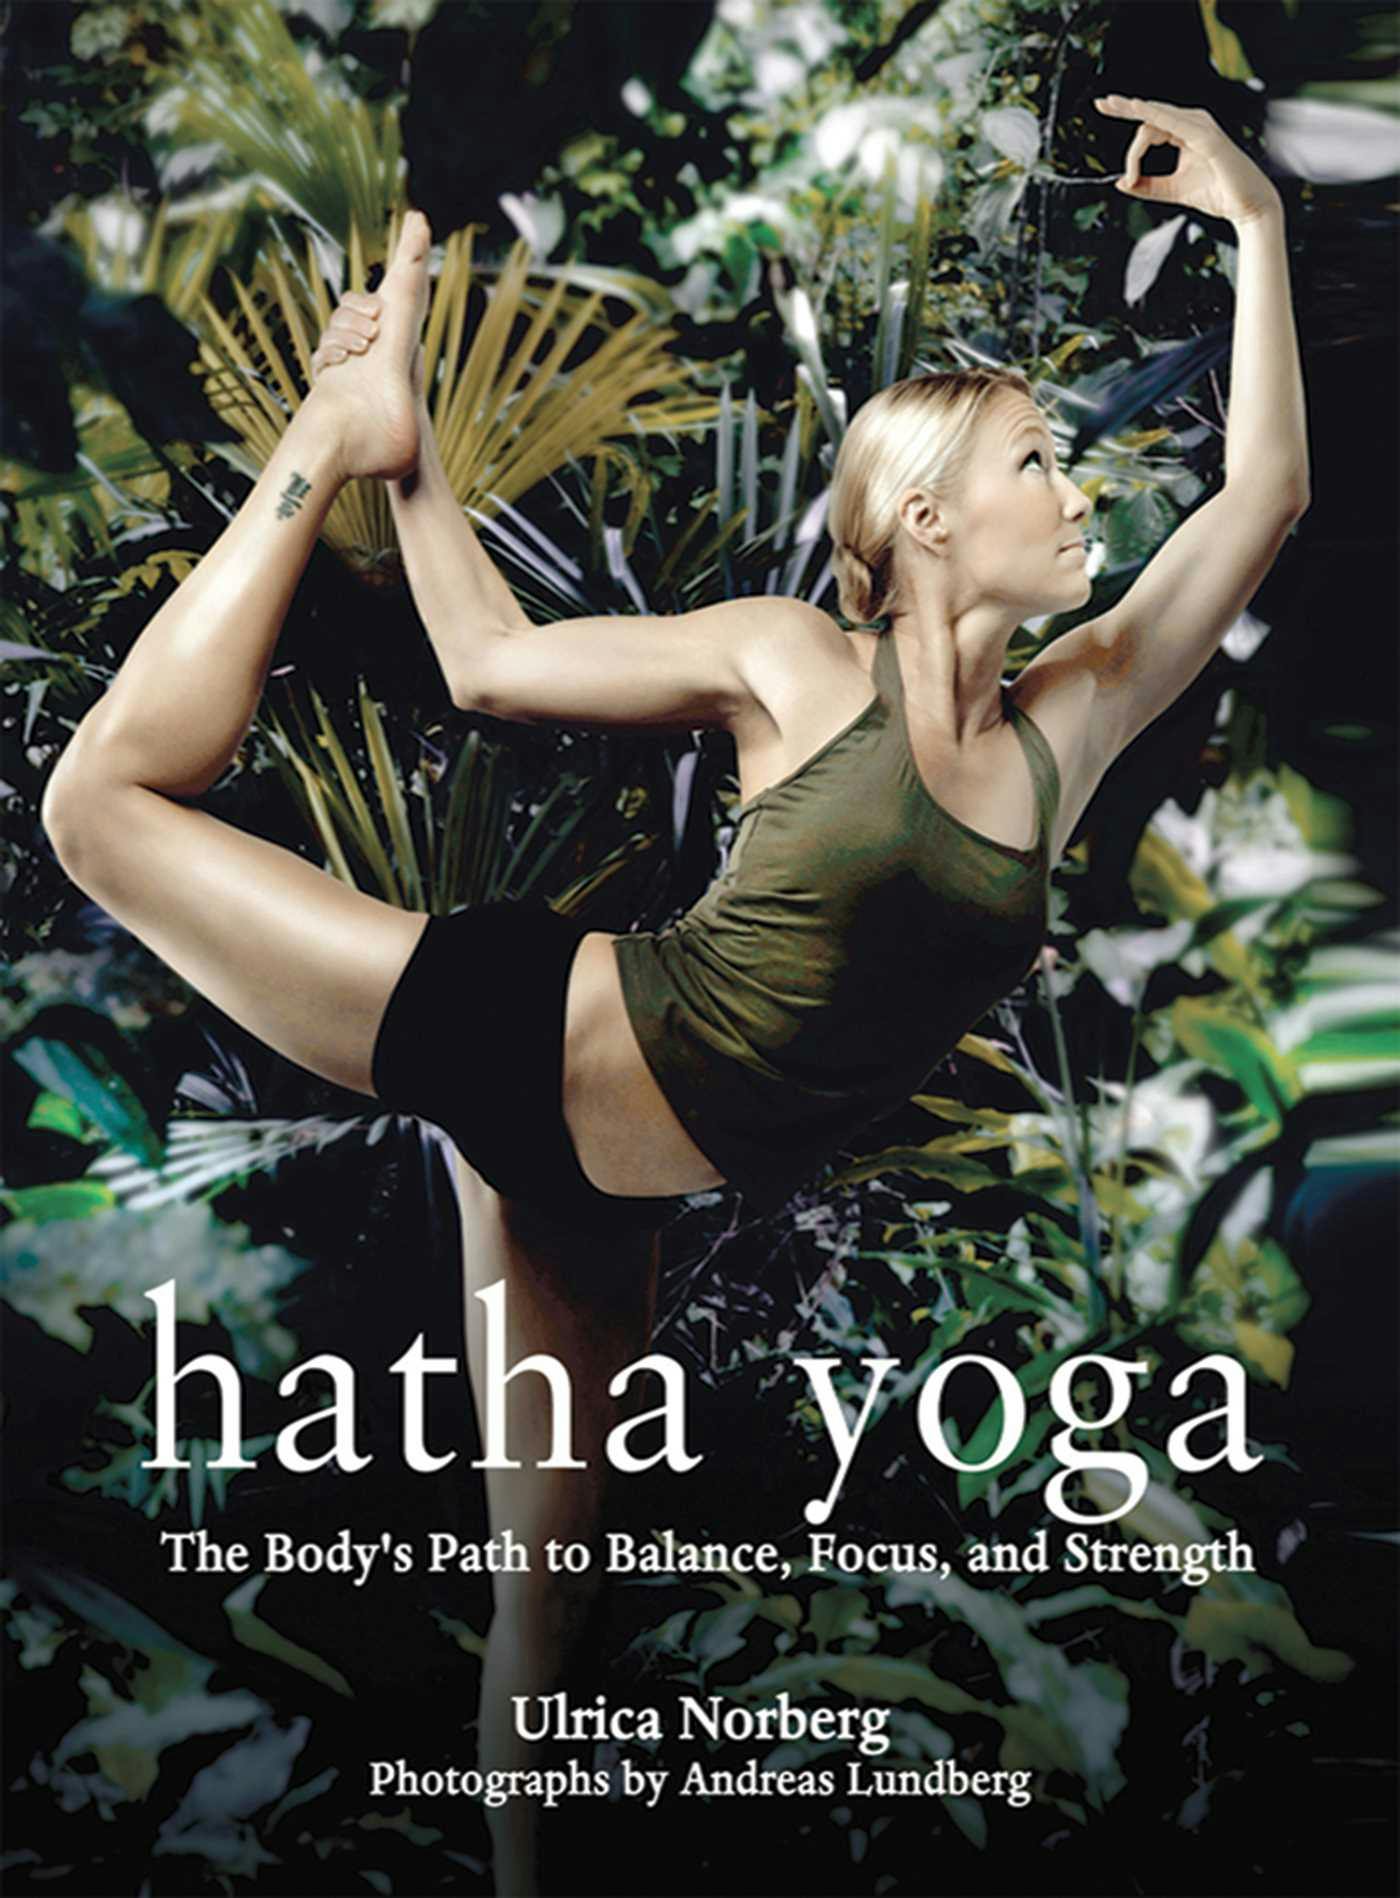 Hatha Yoga: The Body's Path to Balance, Focus, and Strength - Ulrica Norberg